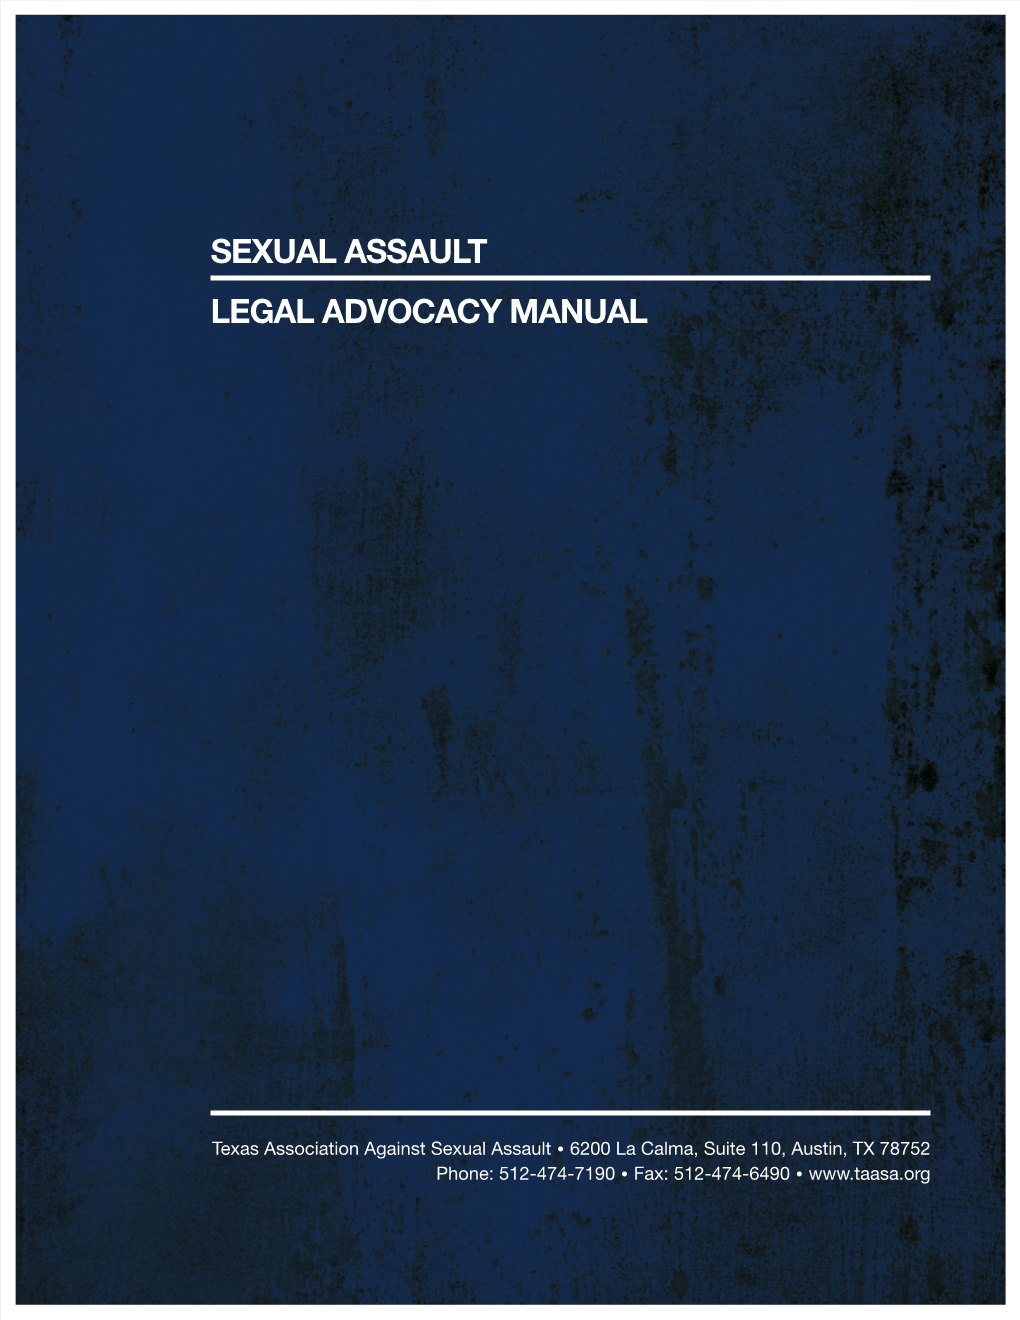 Sexual Assault Legal Advocacy Manual